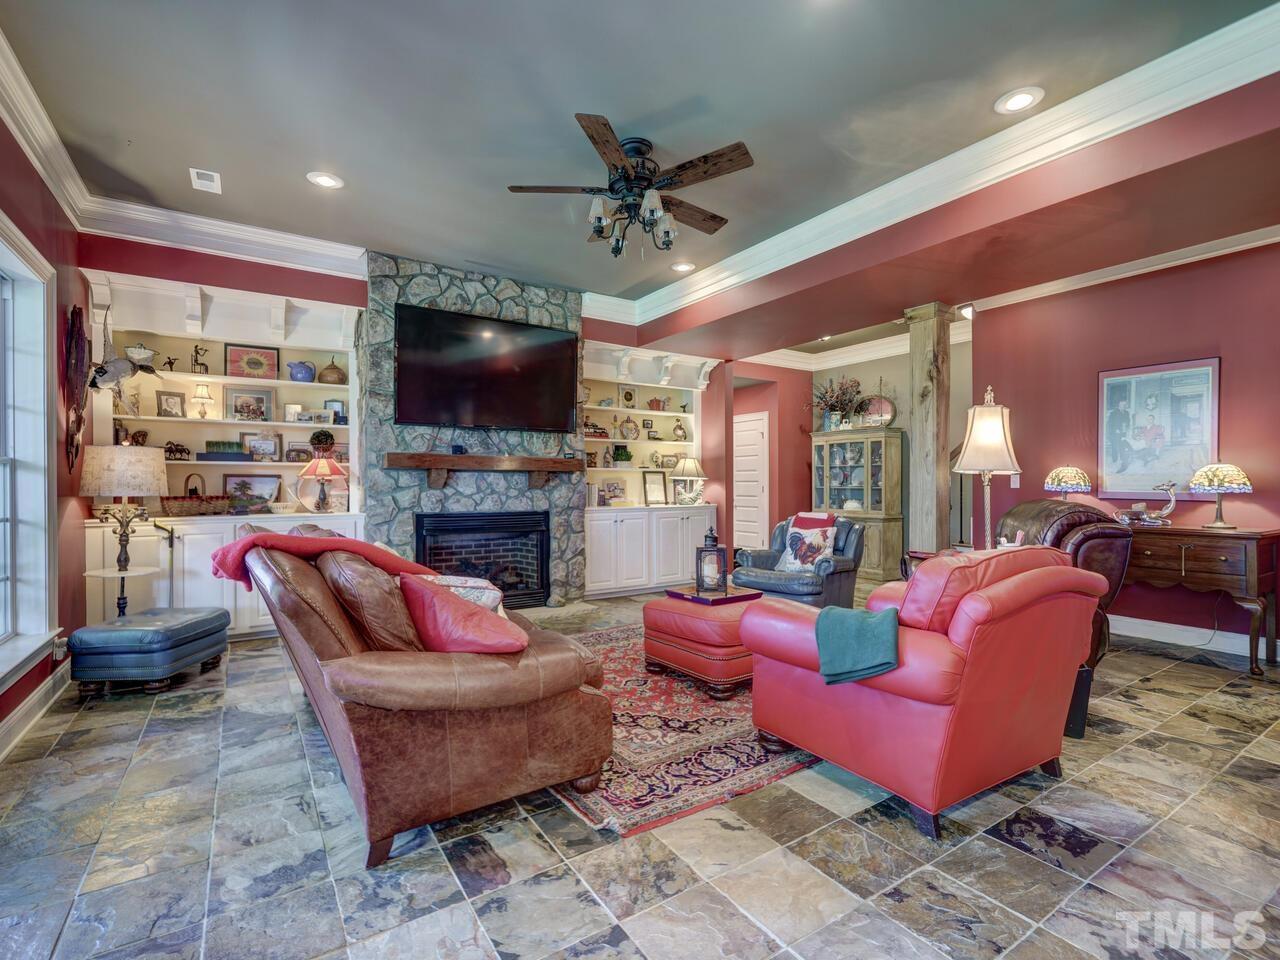 The Lower Level has a spacious Rec Room. There is a Stone Fireplace flanked by Built-In Shelves.